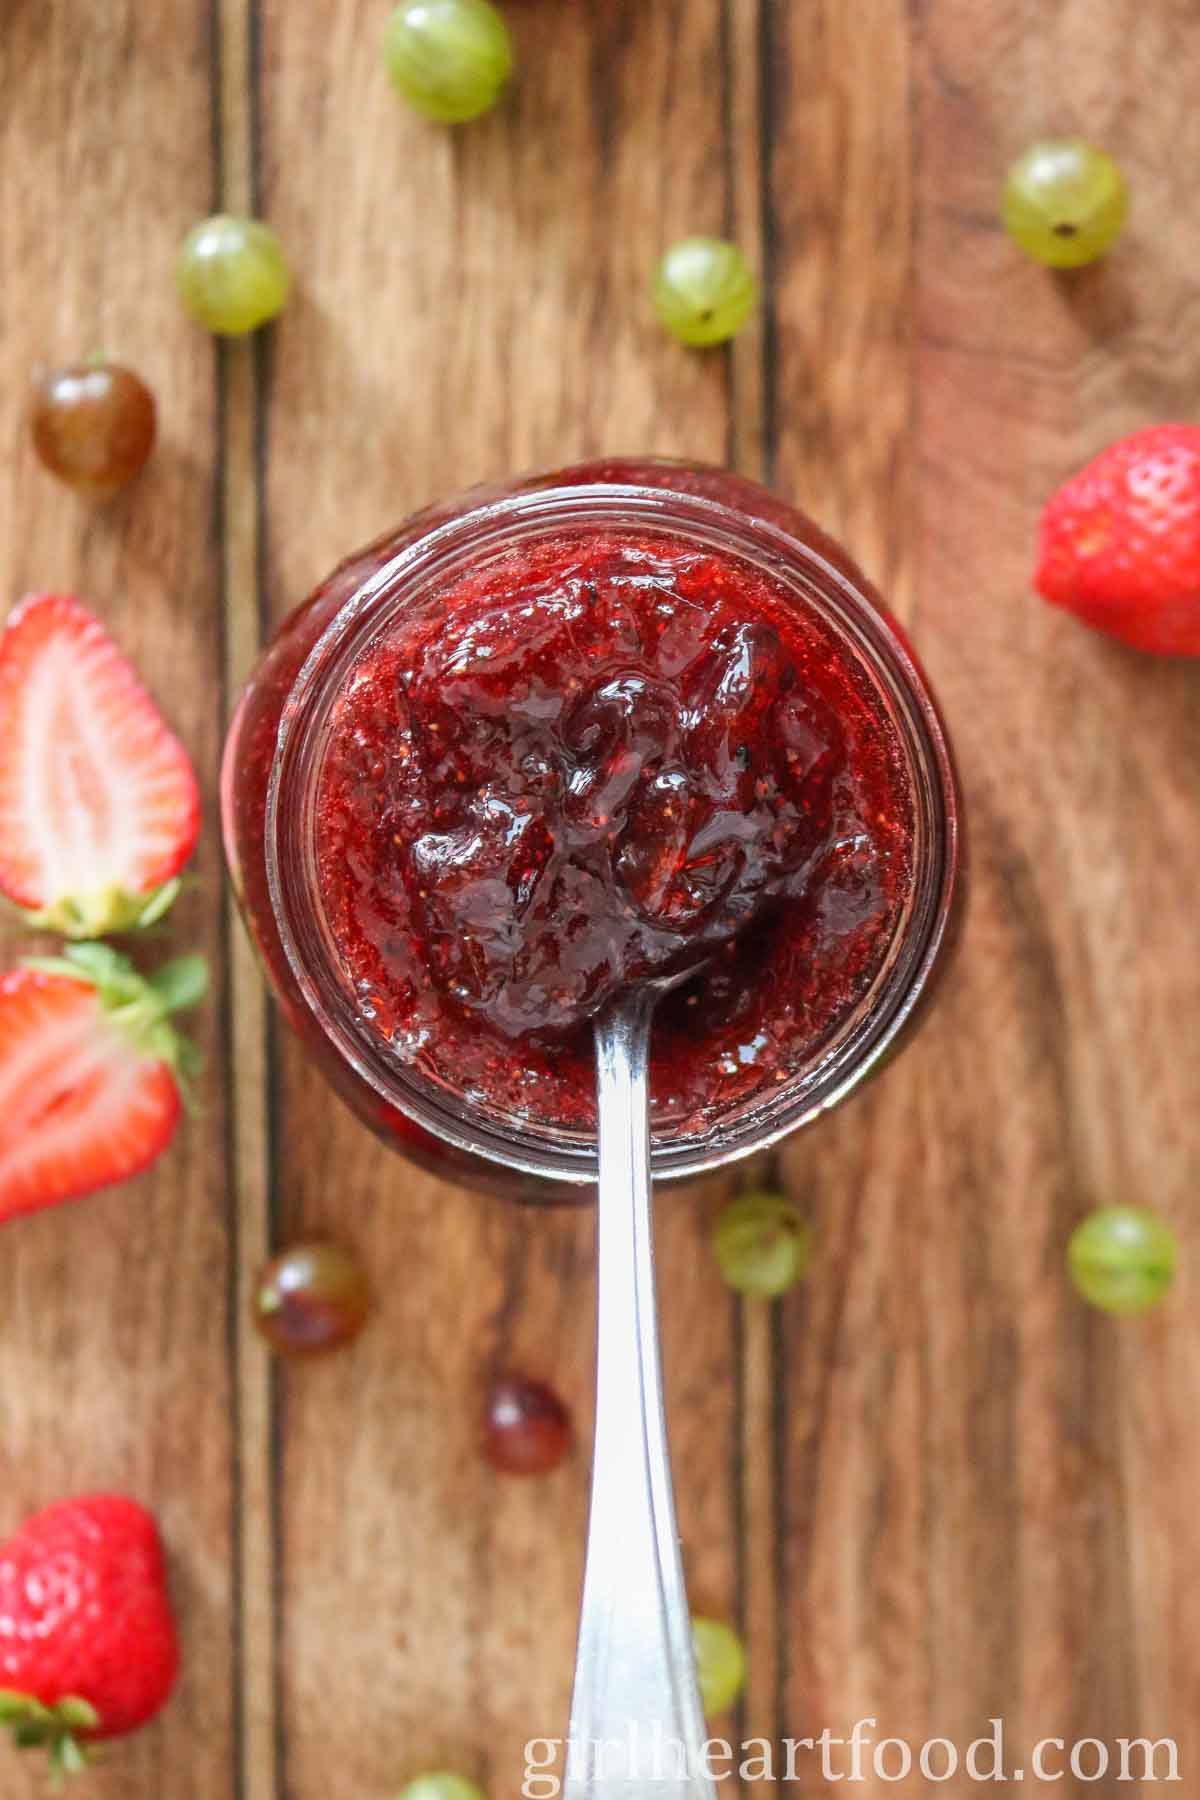 Overhead shot of a jar of gooseberry strawberry jam with a spoon dunked into the jam.